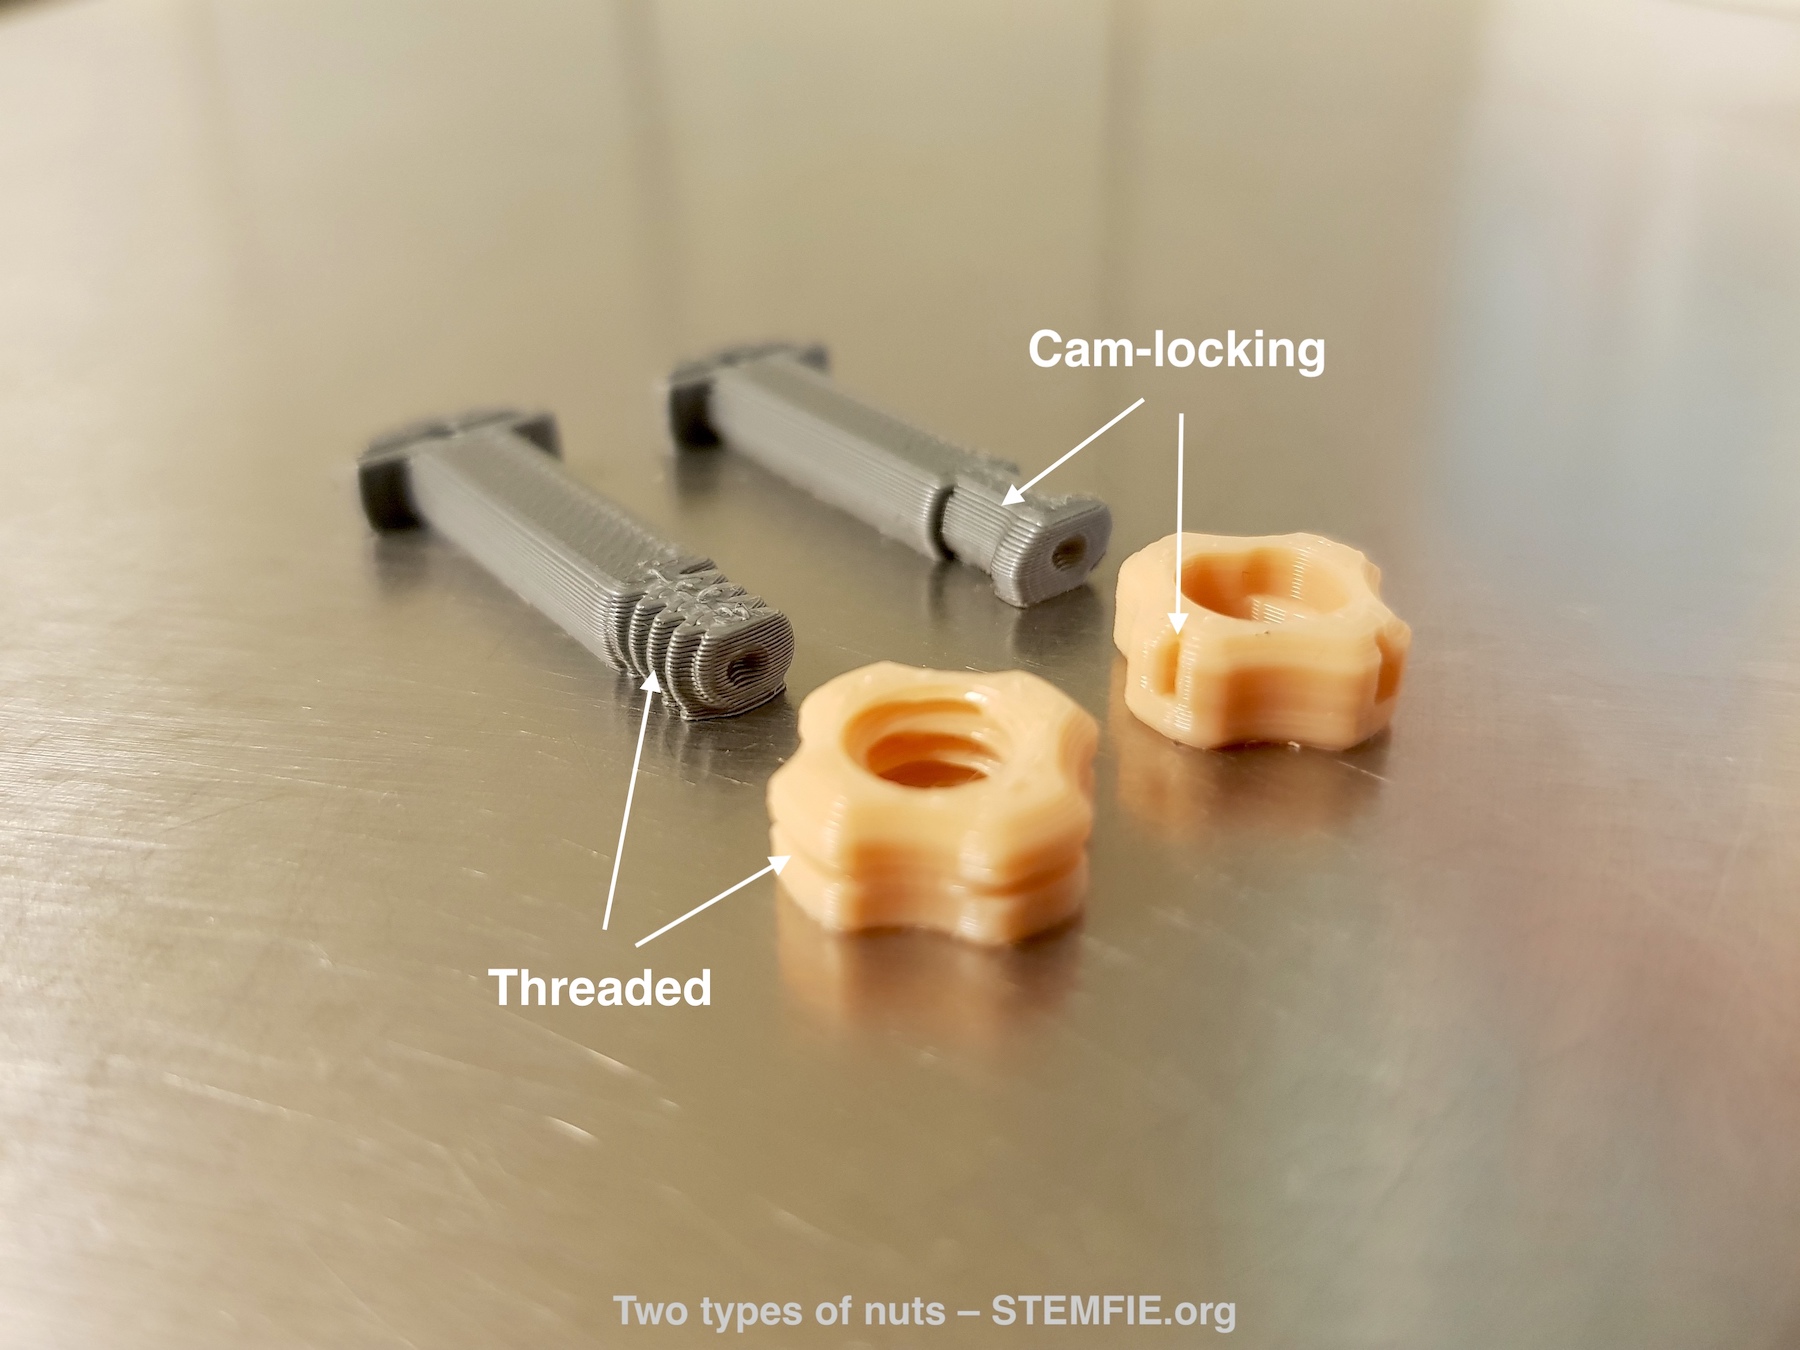 STEMFIE.org Two types of nuts with markings Cam locking and threaded v02